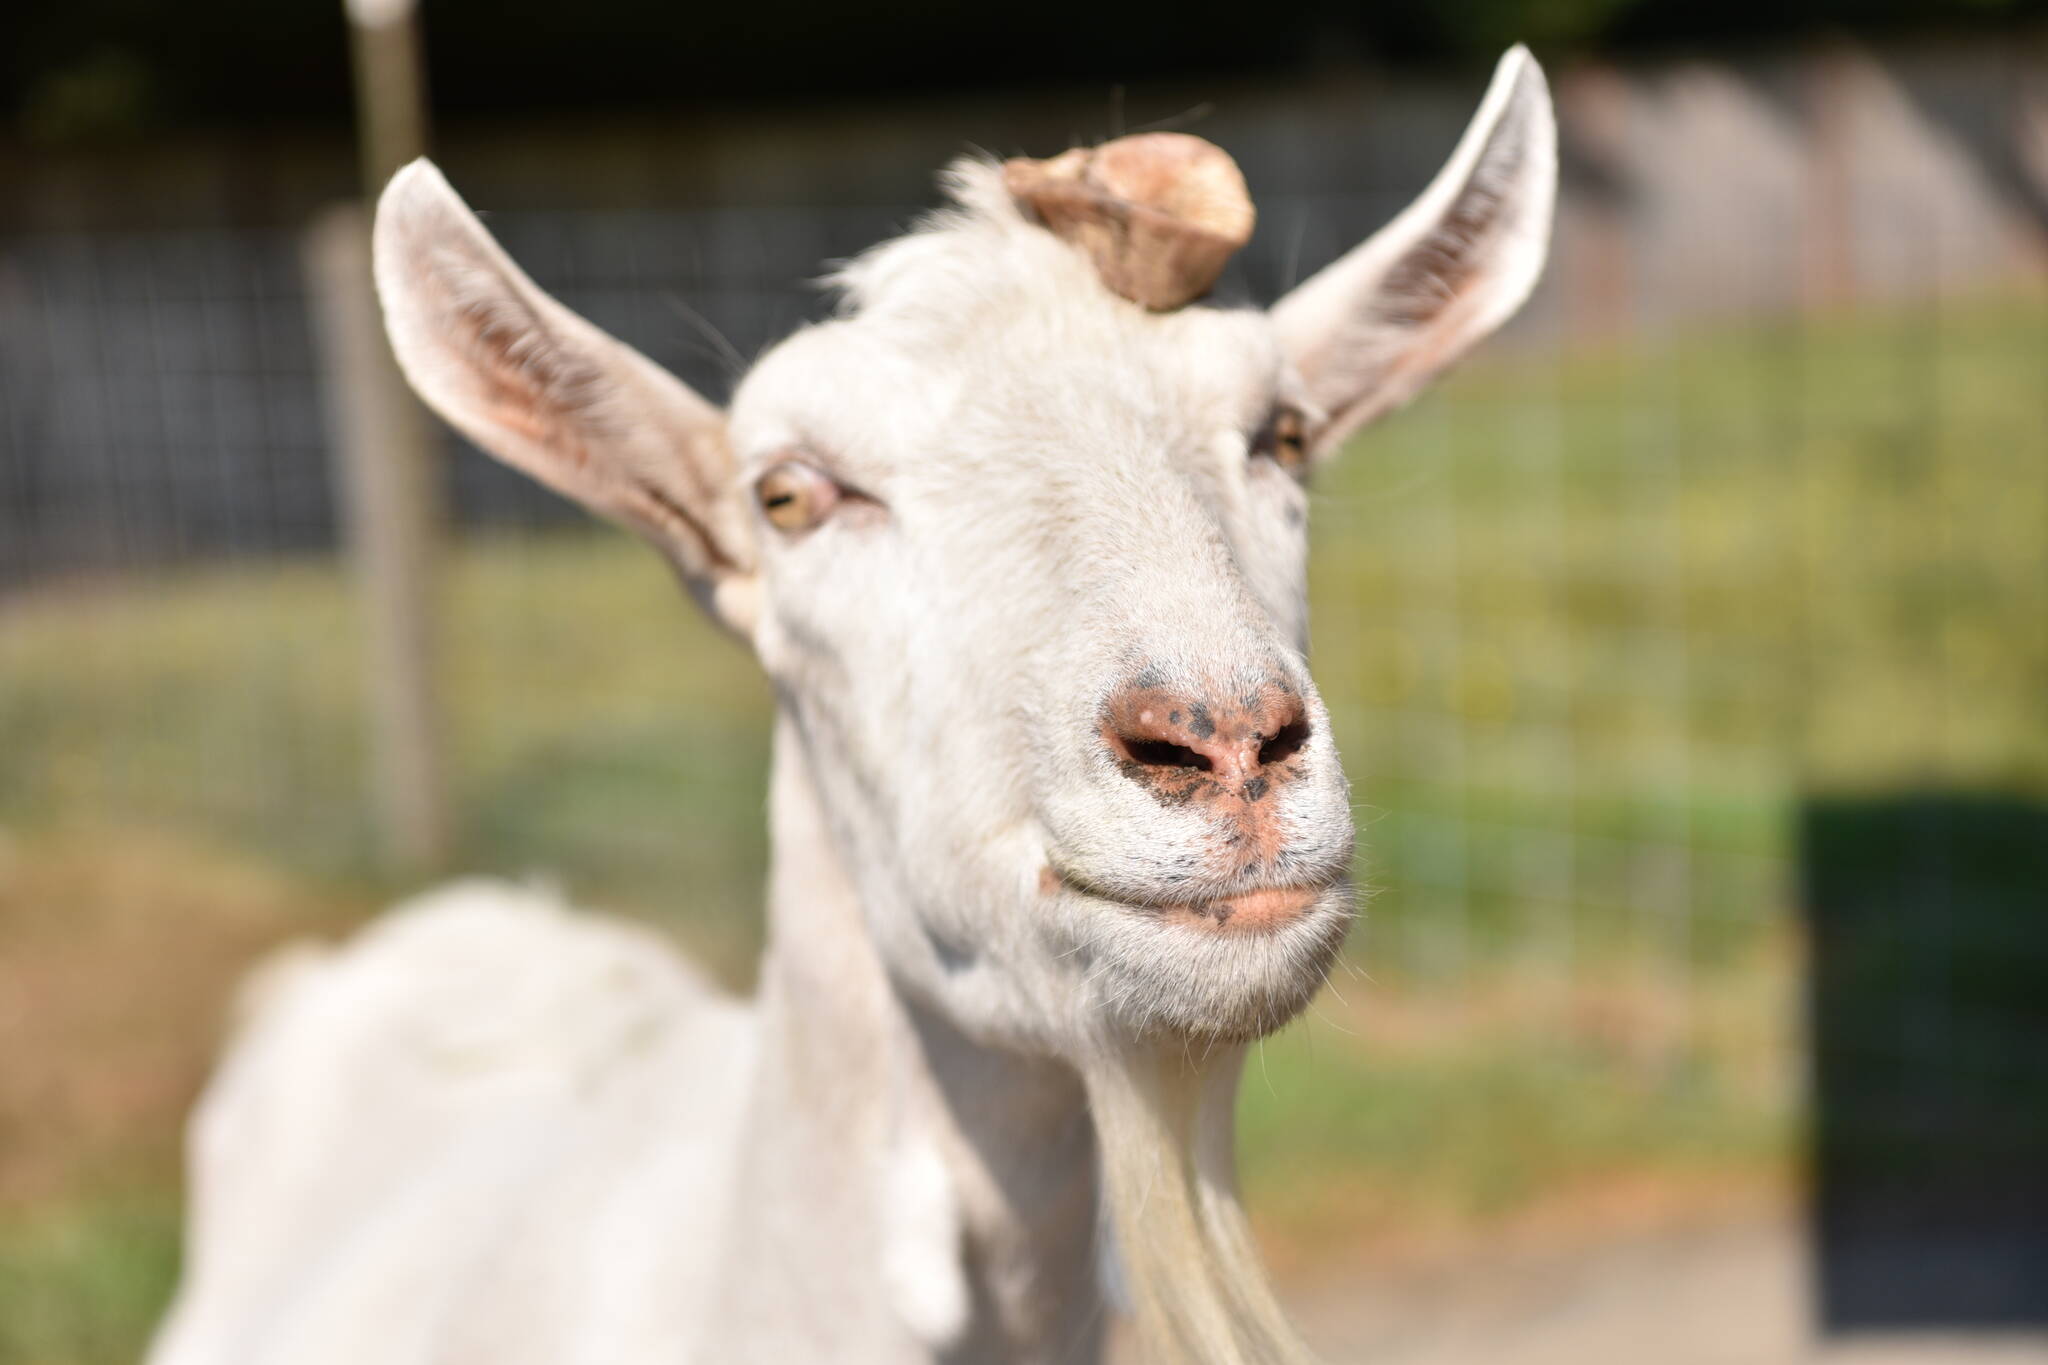 Miles, a rescued Saanen dairy goat, is the oldest animal on the farm.